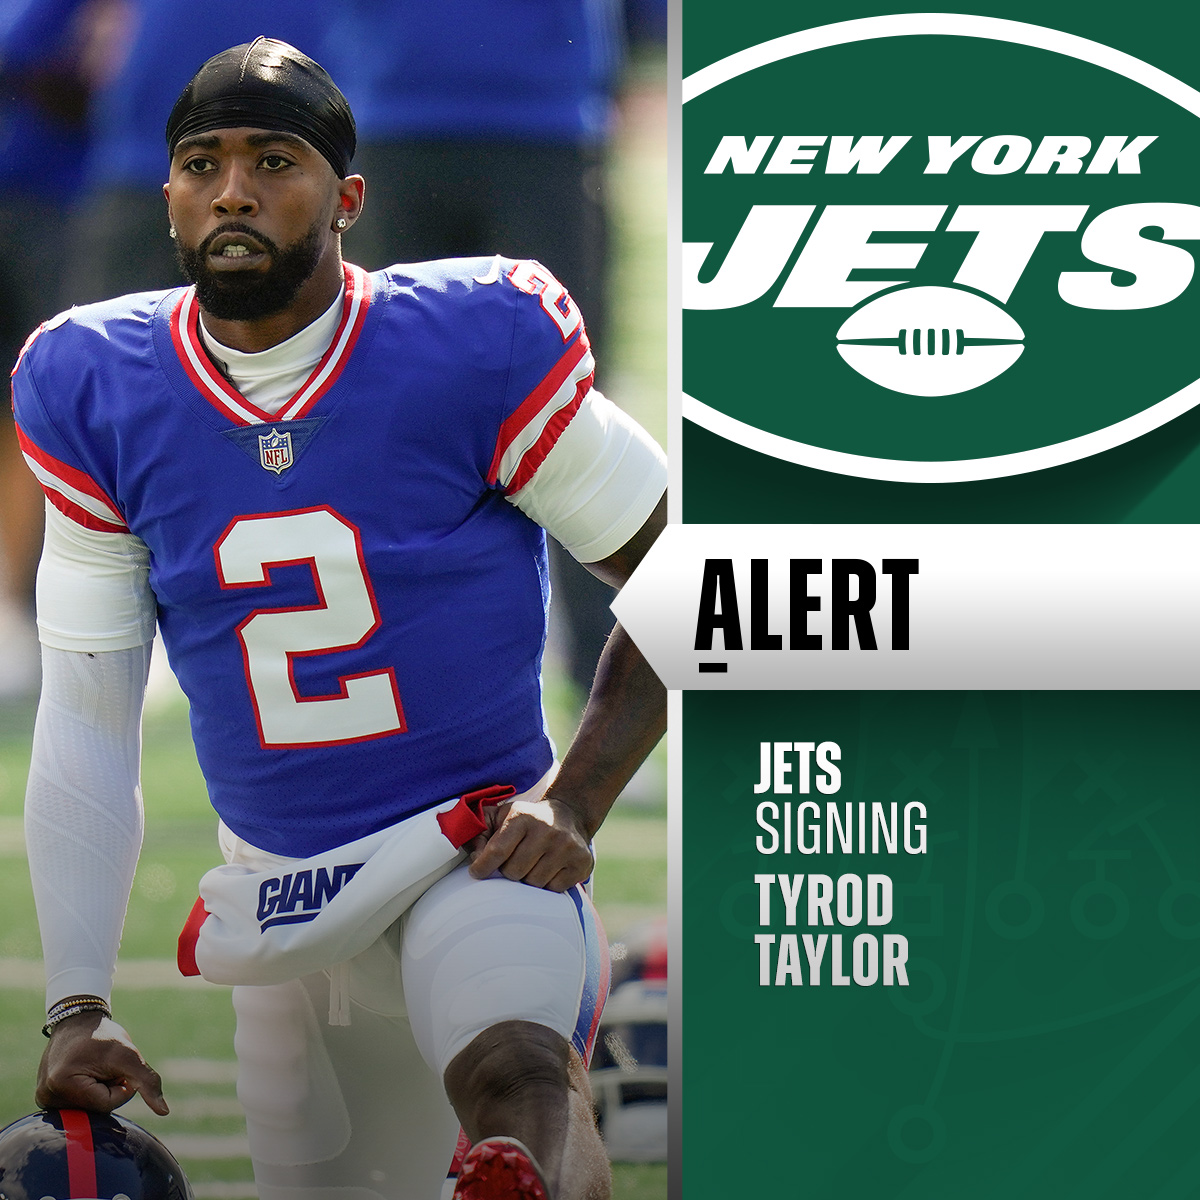 Jets agree to terms with QB Tyrod Taylor. (via @TomPelissero)